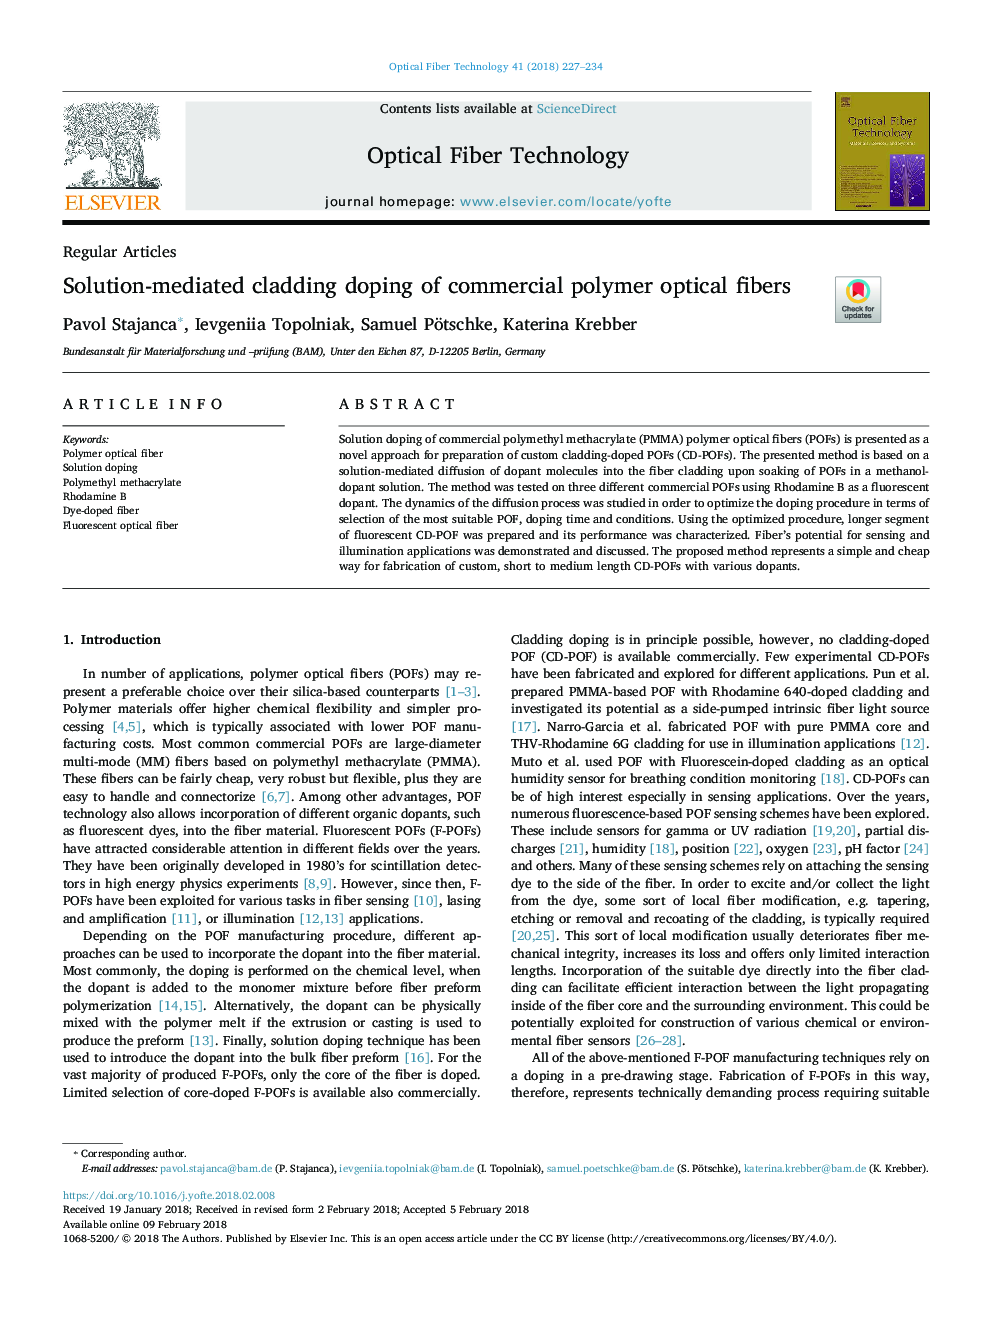 Solution-mediated cladding doping of commercial polymer optical fibers